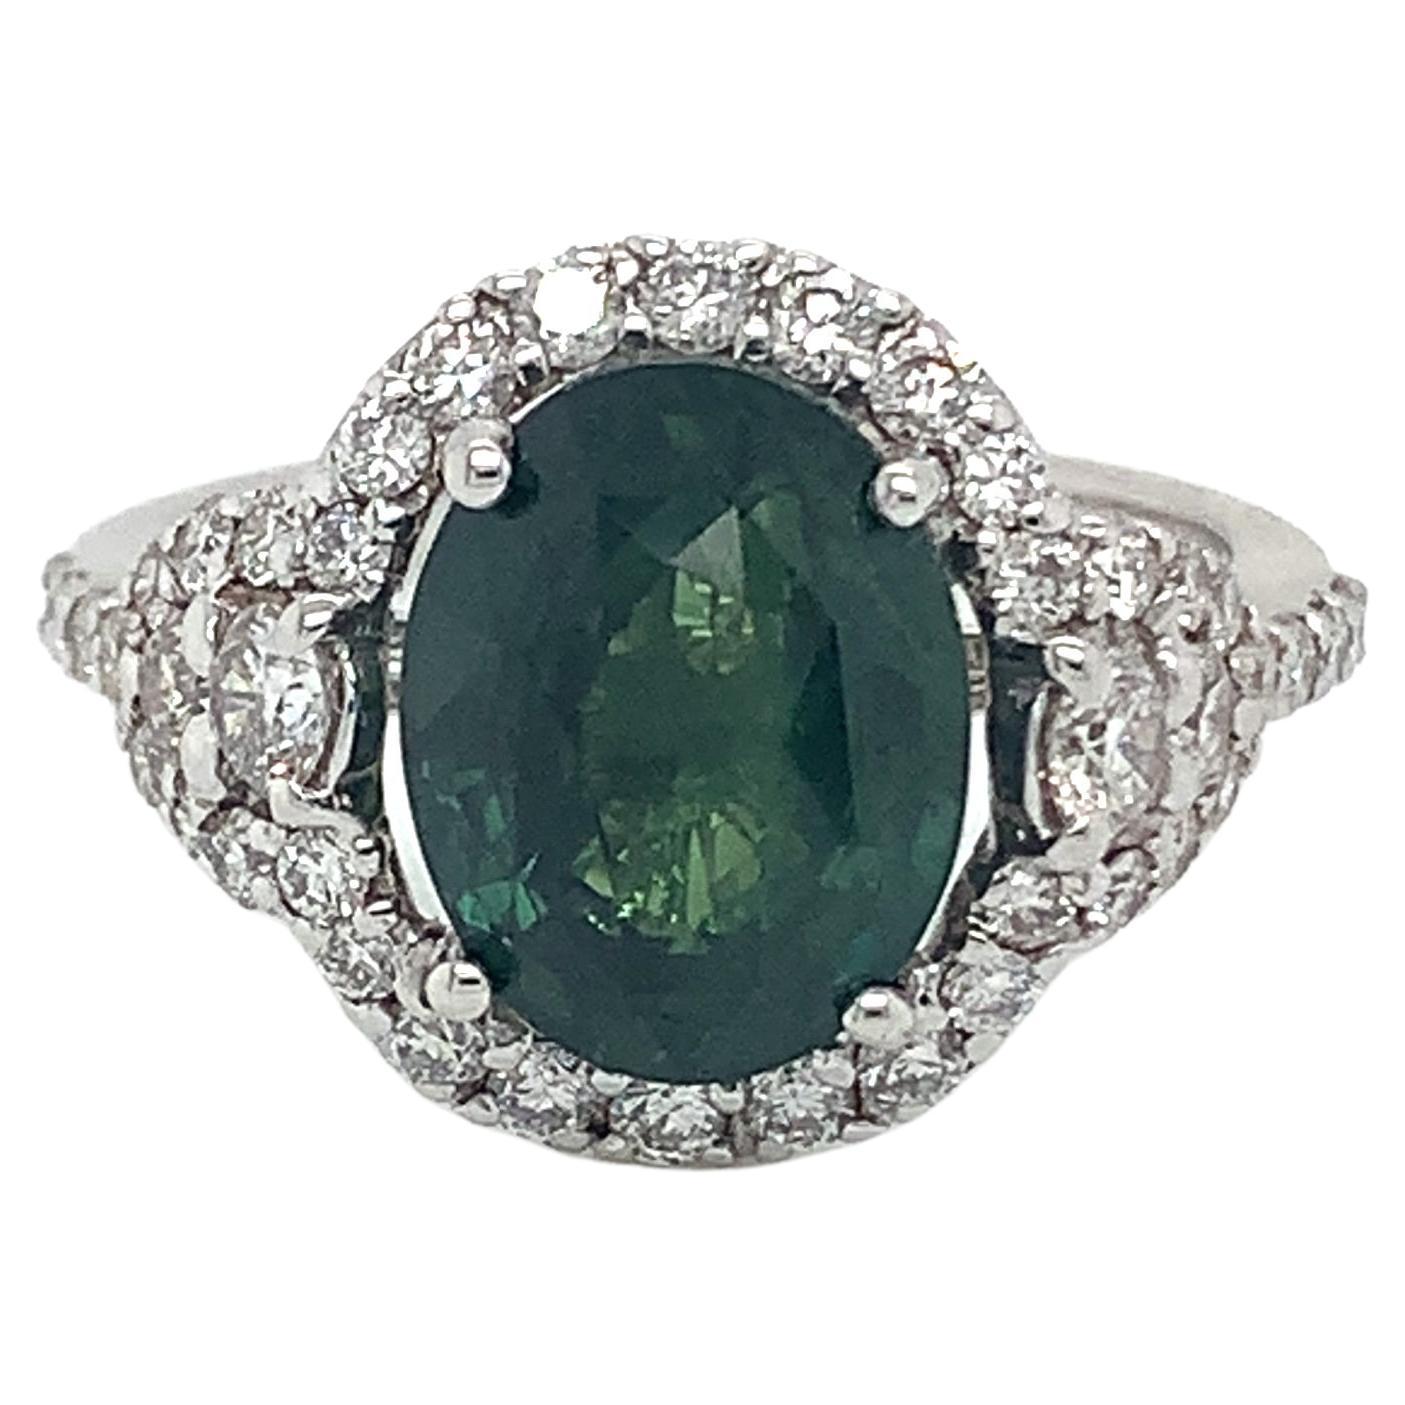 4.69 Carat Oval Green Sapphire & Diamond Ring in 18 Karat White Gold For Sale